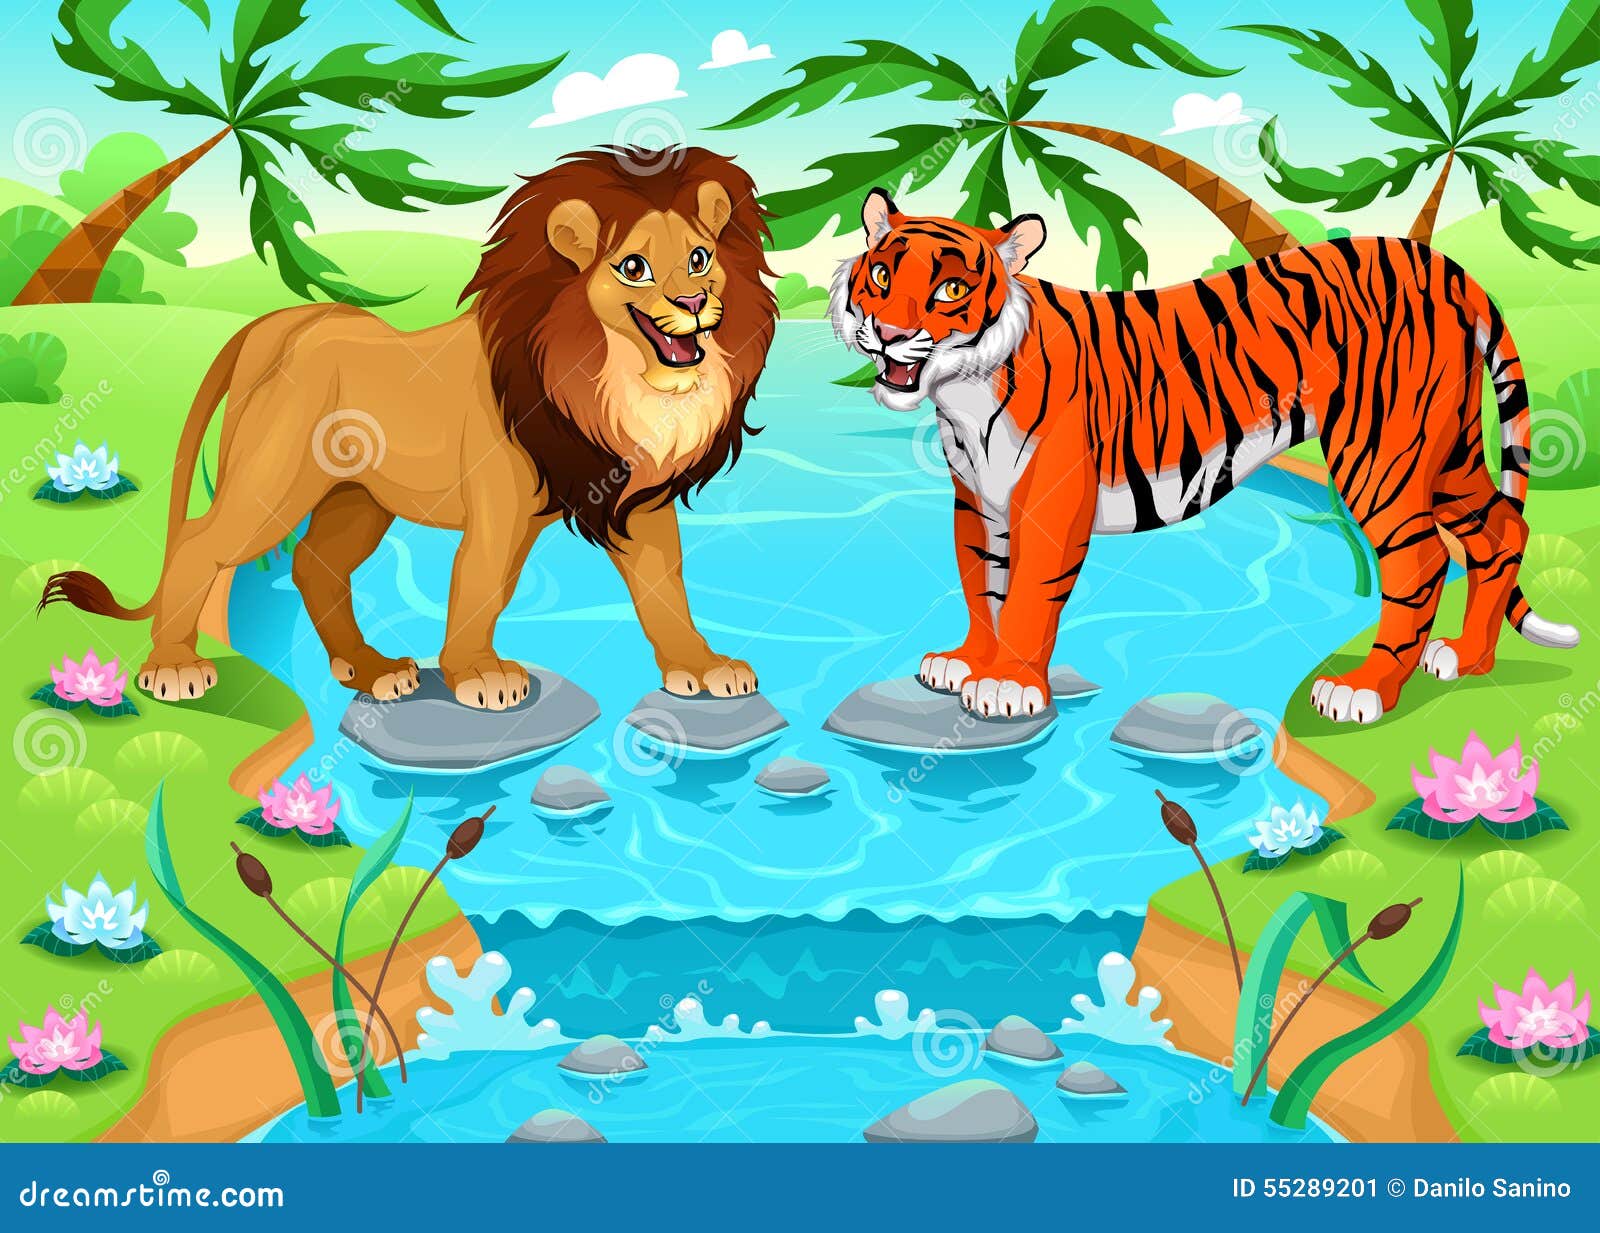 Lion and Tiger Together in the Jungle Stock Vector - Illustration ...